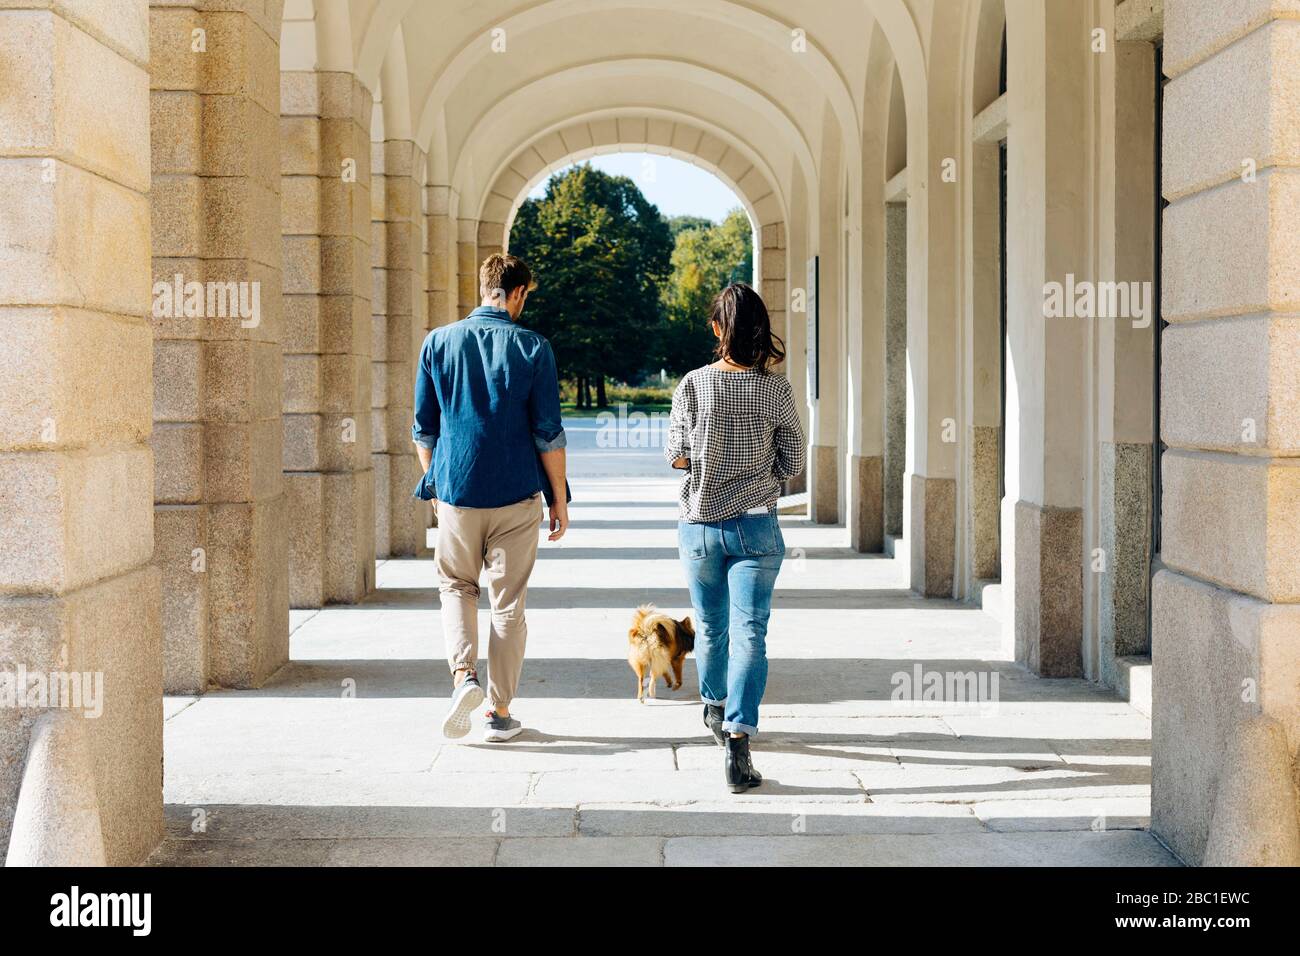 Rear view of young couple walking with dog in an arcade Stock Photo